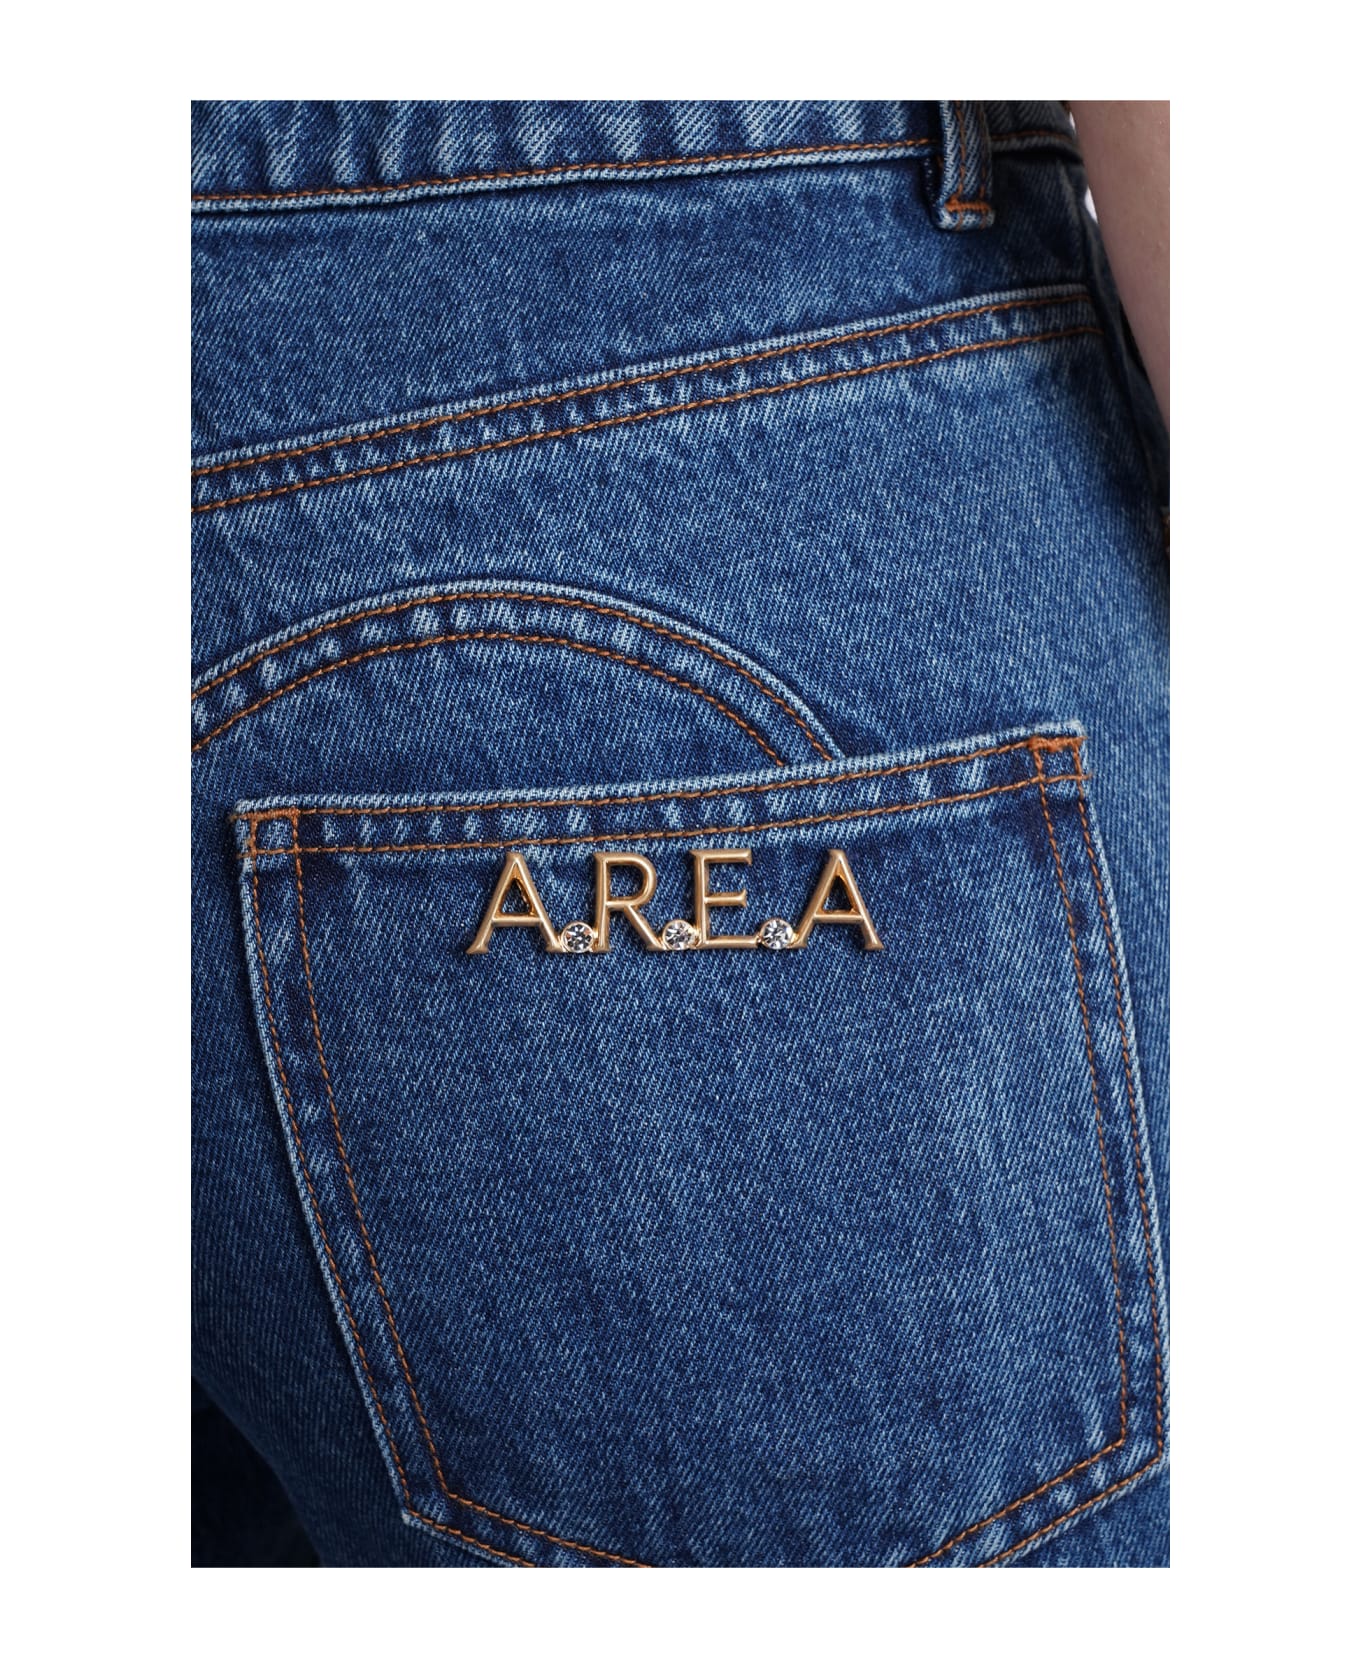 AREA Jeans In Blue Cotton - blue デニム